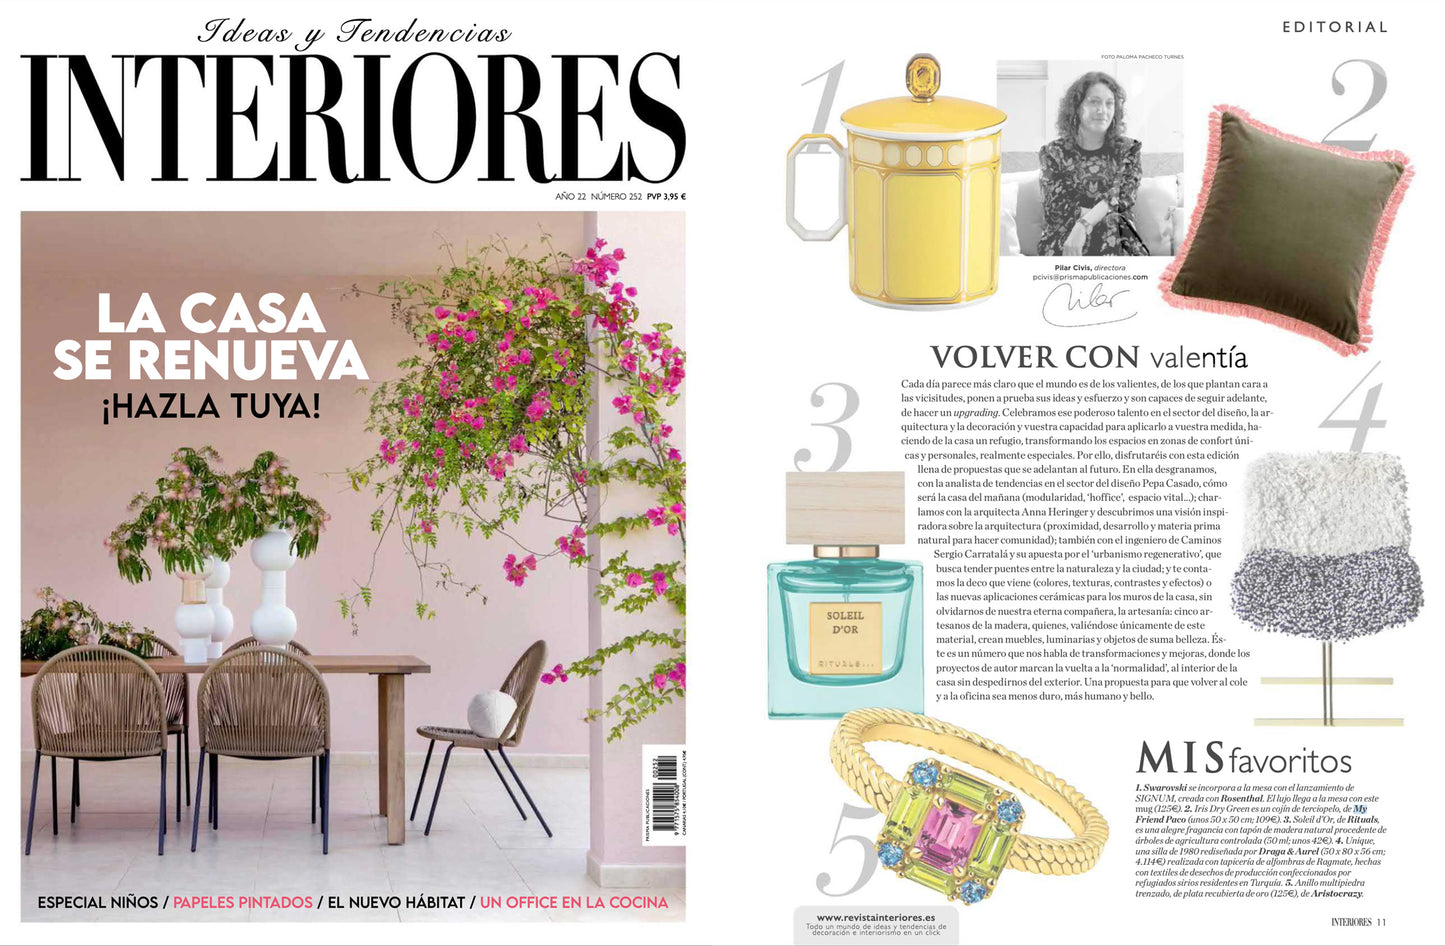 press clipping - My friend paco at Interiores Magazine